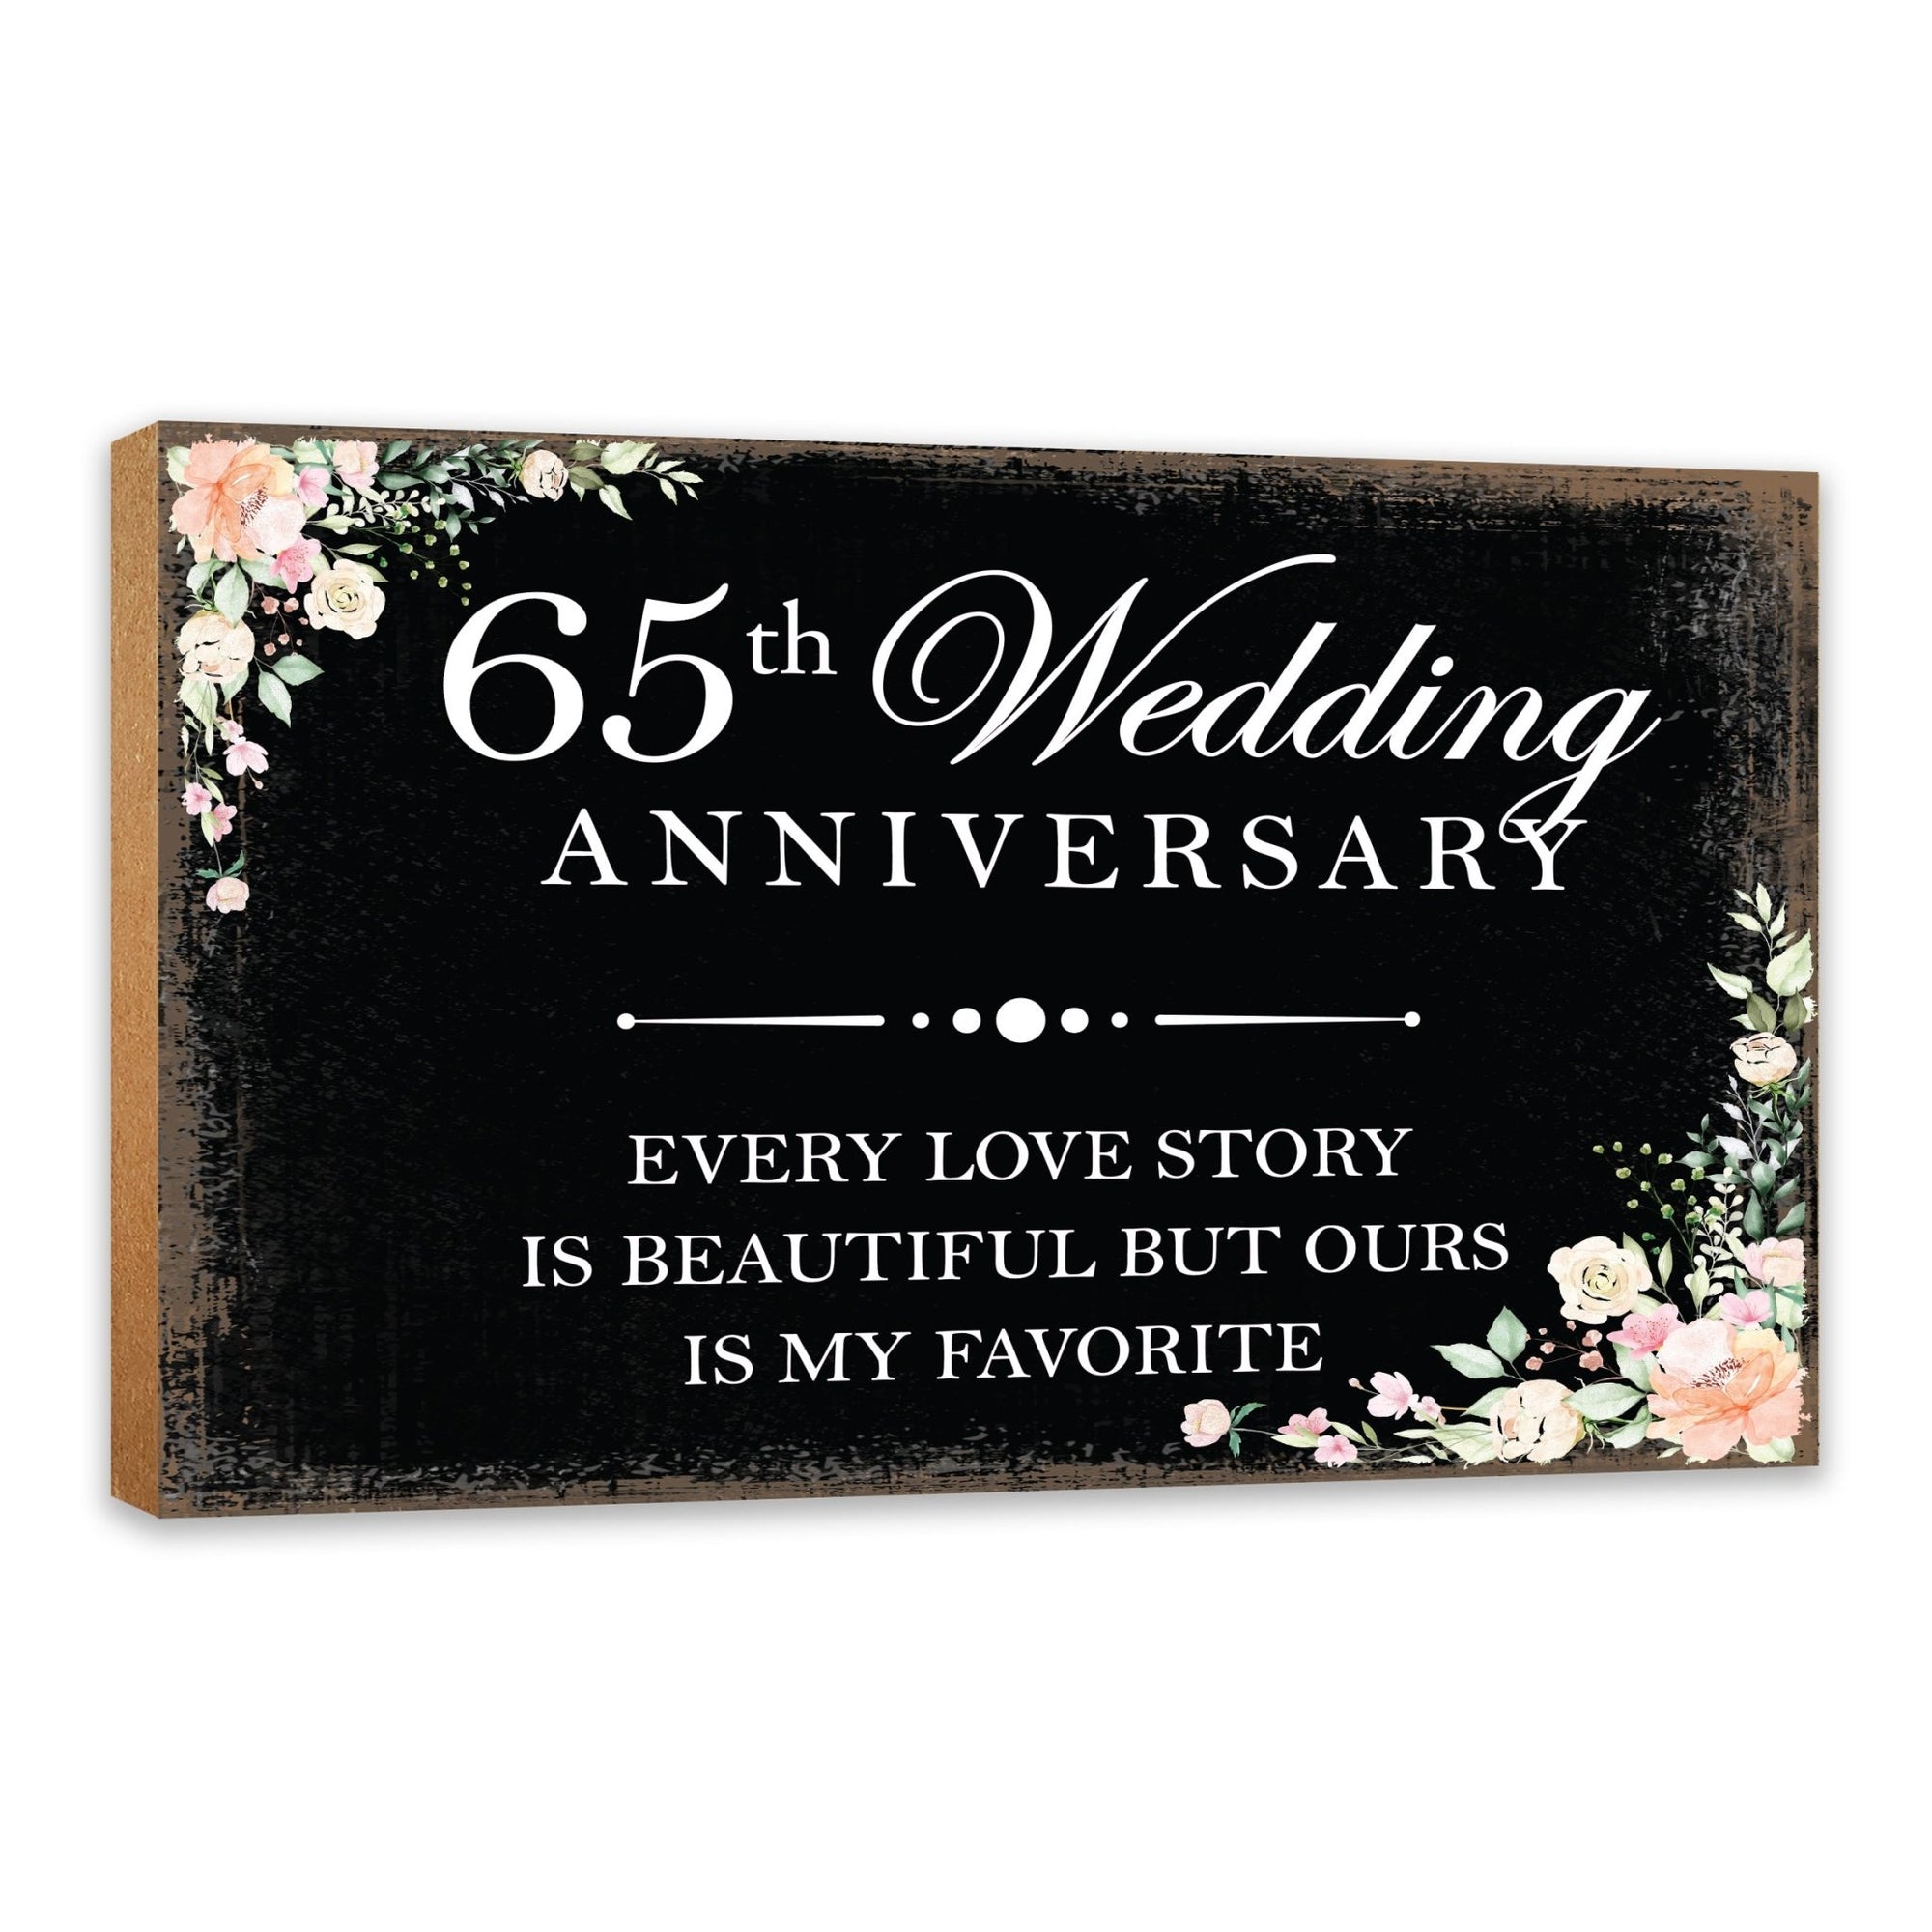 65th Wedding Anniversary Unique Shelf Decor and Tabletop Signs Gift for Couples - Every Love Story - LifeSong Milestones